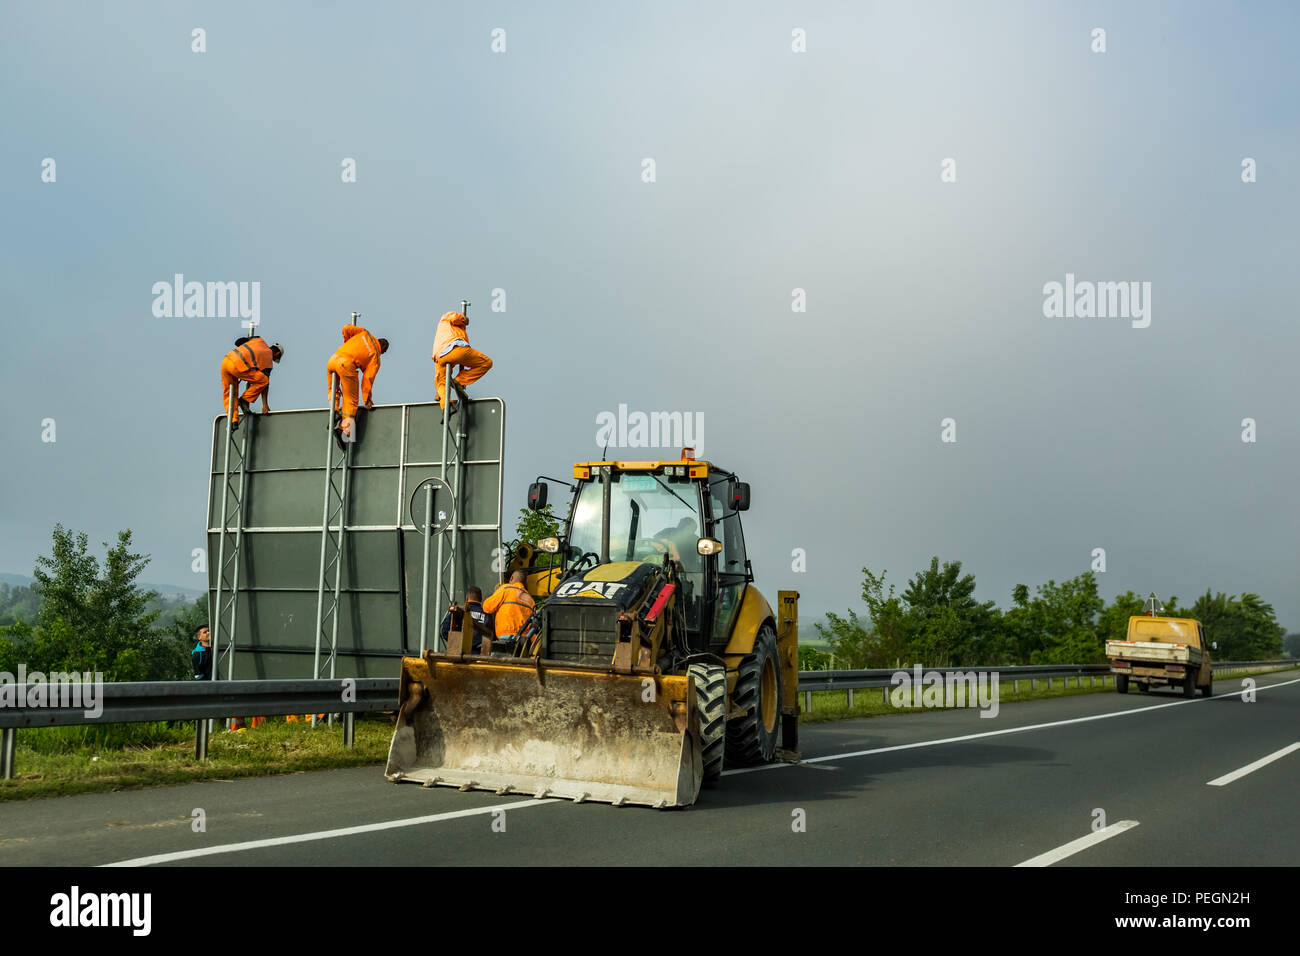 BELGRADE, SERBIA - MAY 15, 2017: Three men in orange work suits put up new traffic board sign on a newly reconstructed major road near Serbian capital city of Belgrade in a hazy day Stock Photo